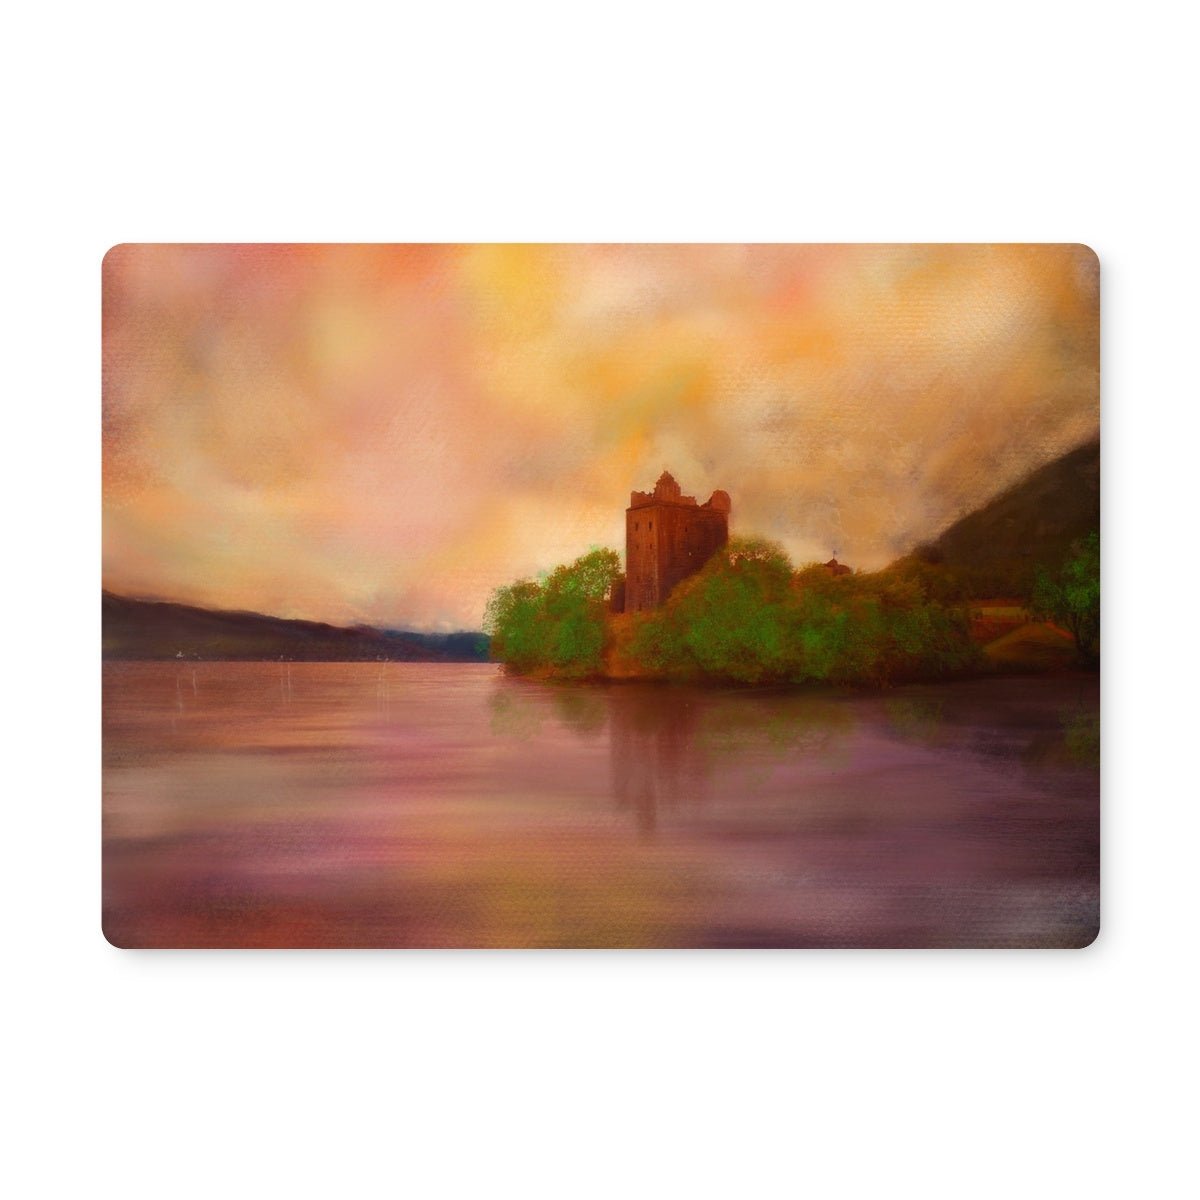 Urquhart Castle Art Gifts Placemat-Placemats-Historic & Iconic Scotland Art Gallery-Single Placemat-Paintings, Prints, Homeware, Art Gifts From Scotland By Scottish Artist Kevin Hunter